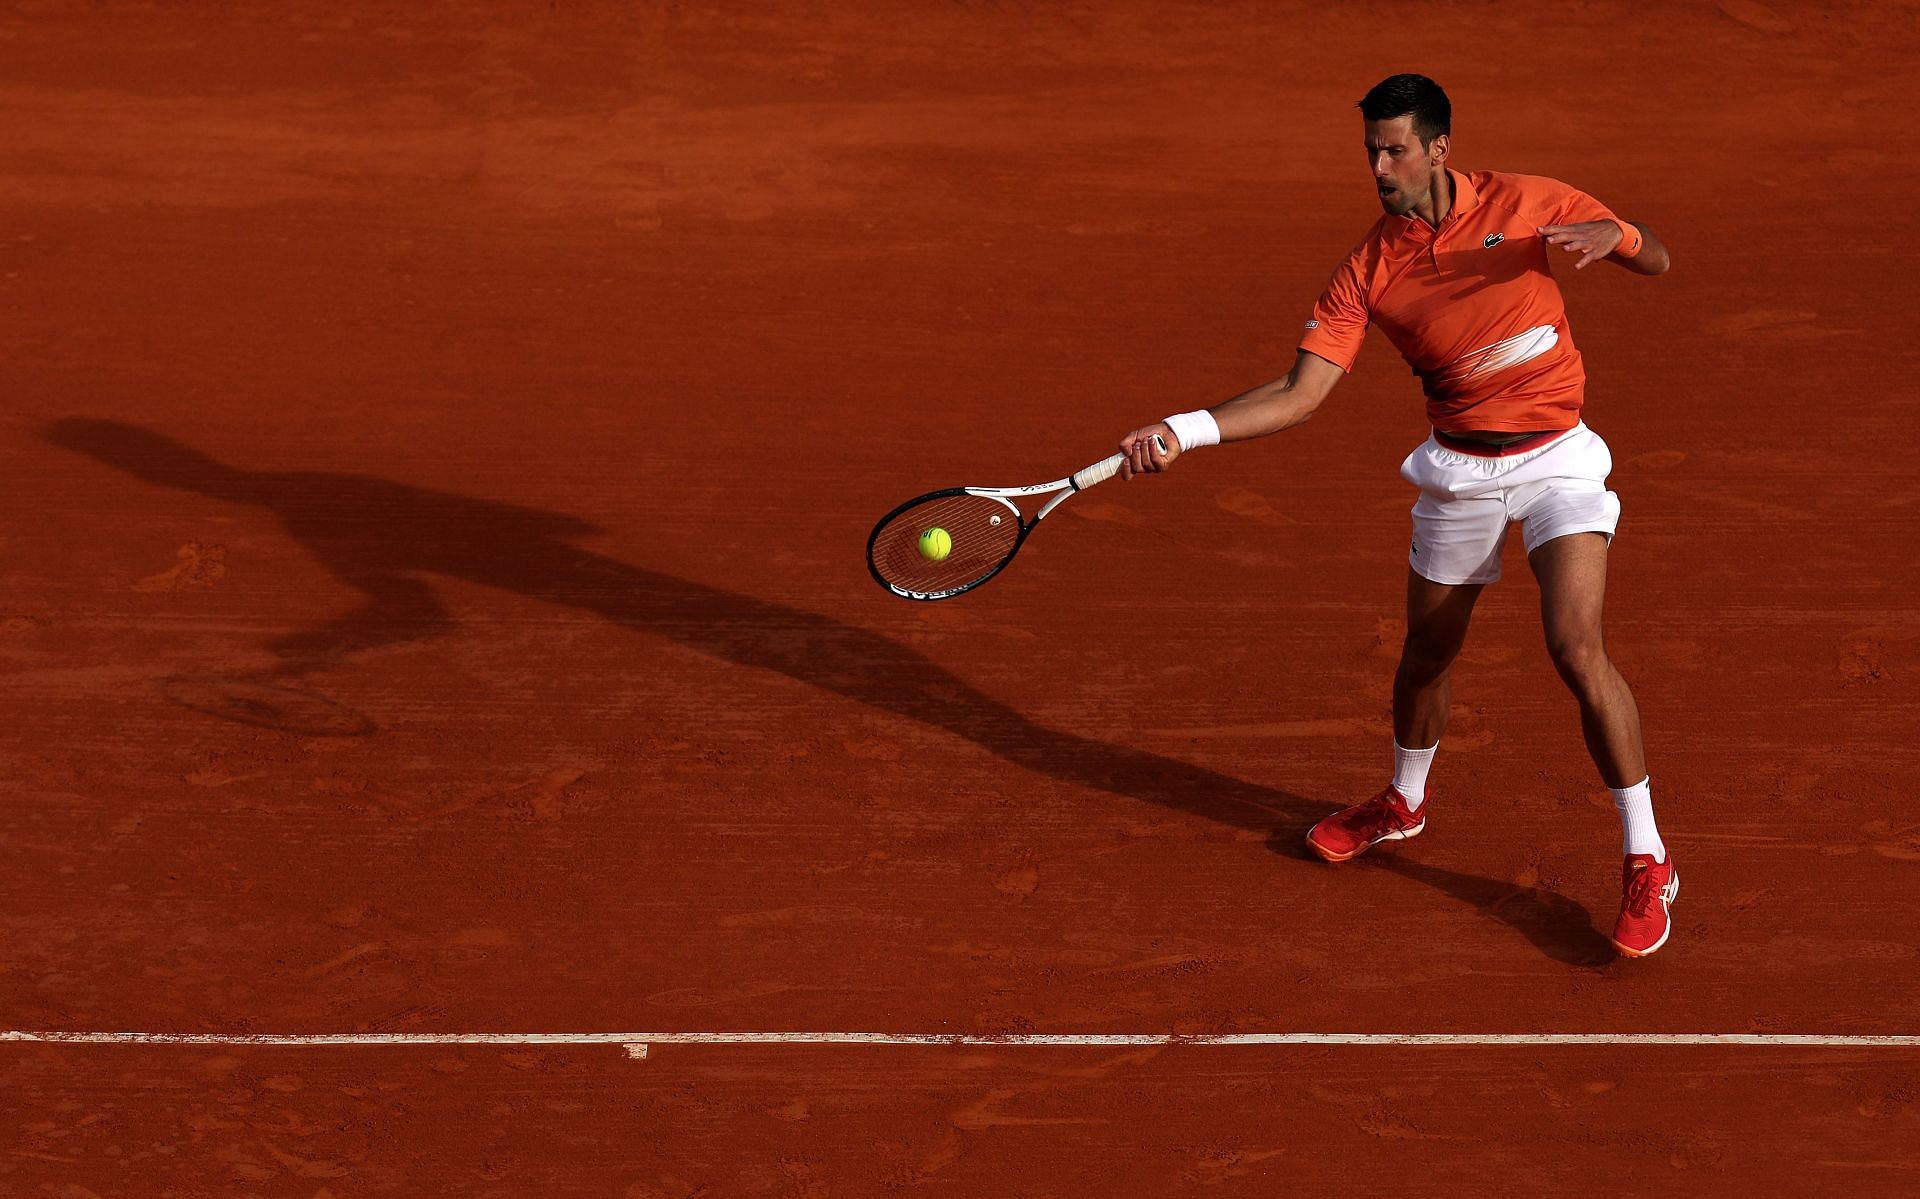 Djokovic in action at the 2022 Rolex Monte-Carlo Masters - Day 3